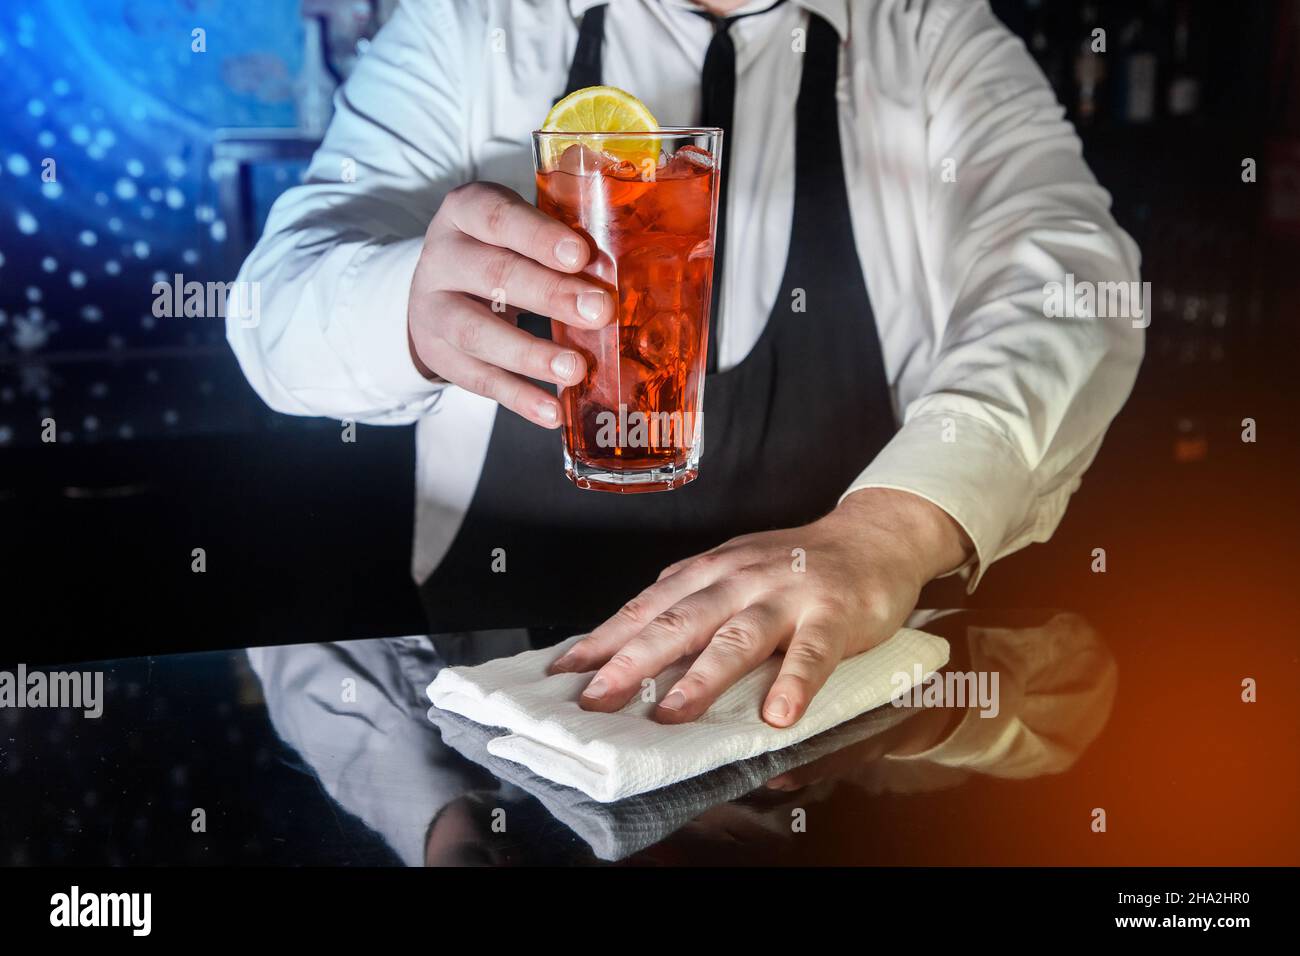 A professional bartender holds in his hand a red alcoholic cocktail, chilled drink in glass decorated with a slice of sliced lemon and wipes the bar c Stock Photo